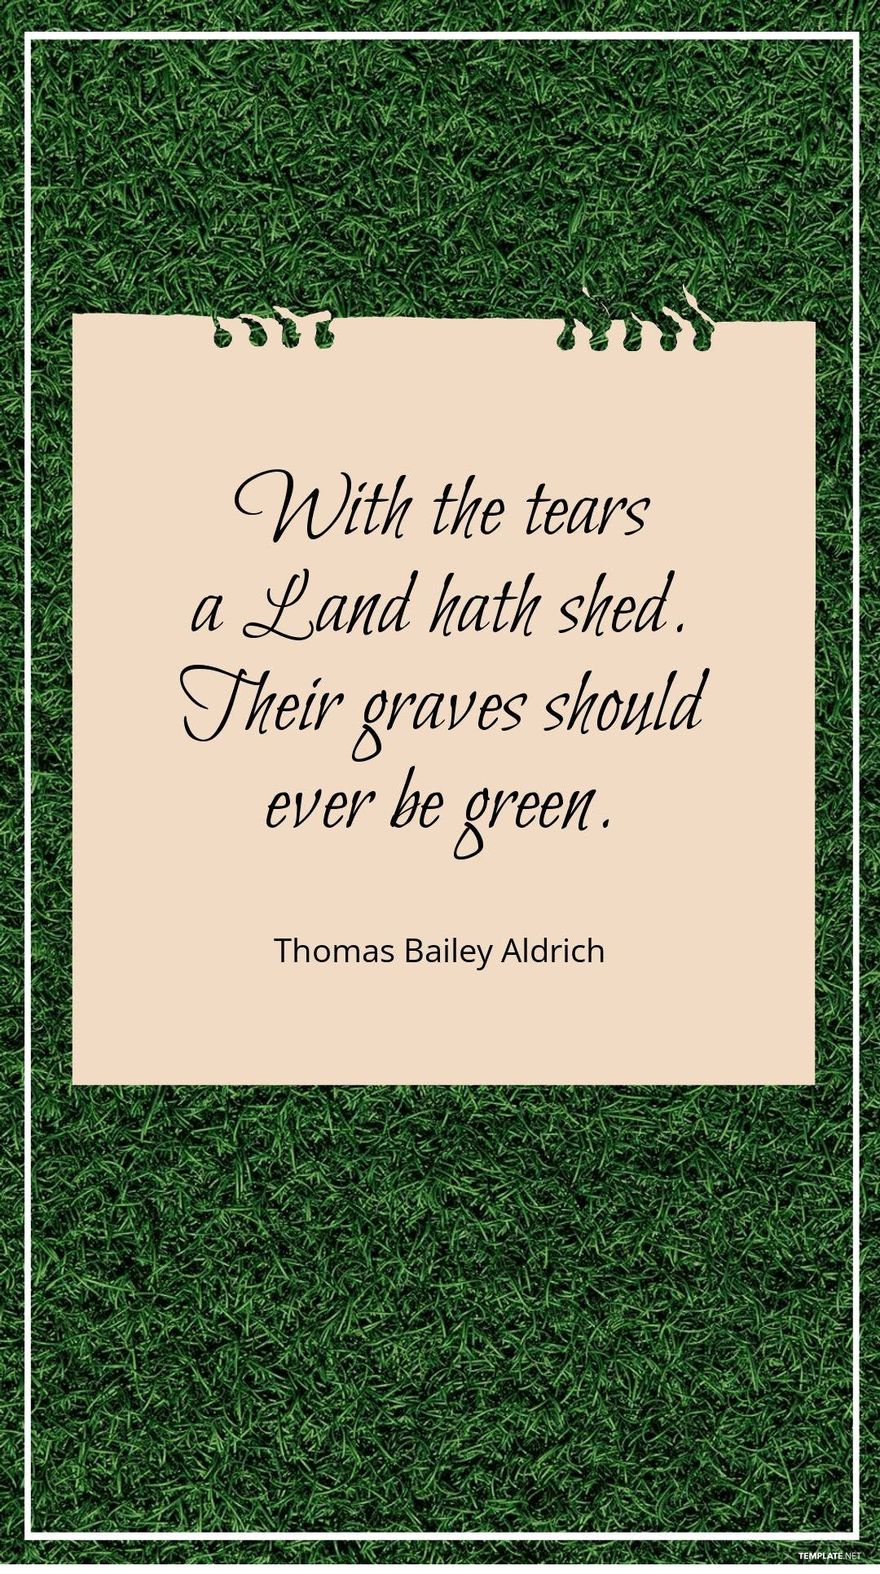 Free Thomas Bailey Aldrich - With the tears a Land hath shed. Their graves should ever be green. Template